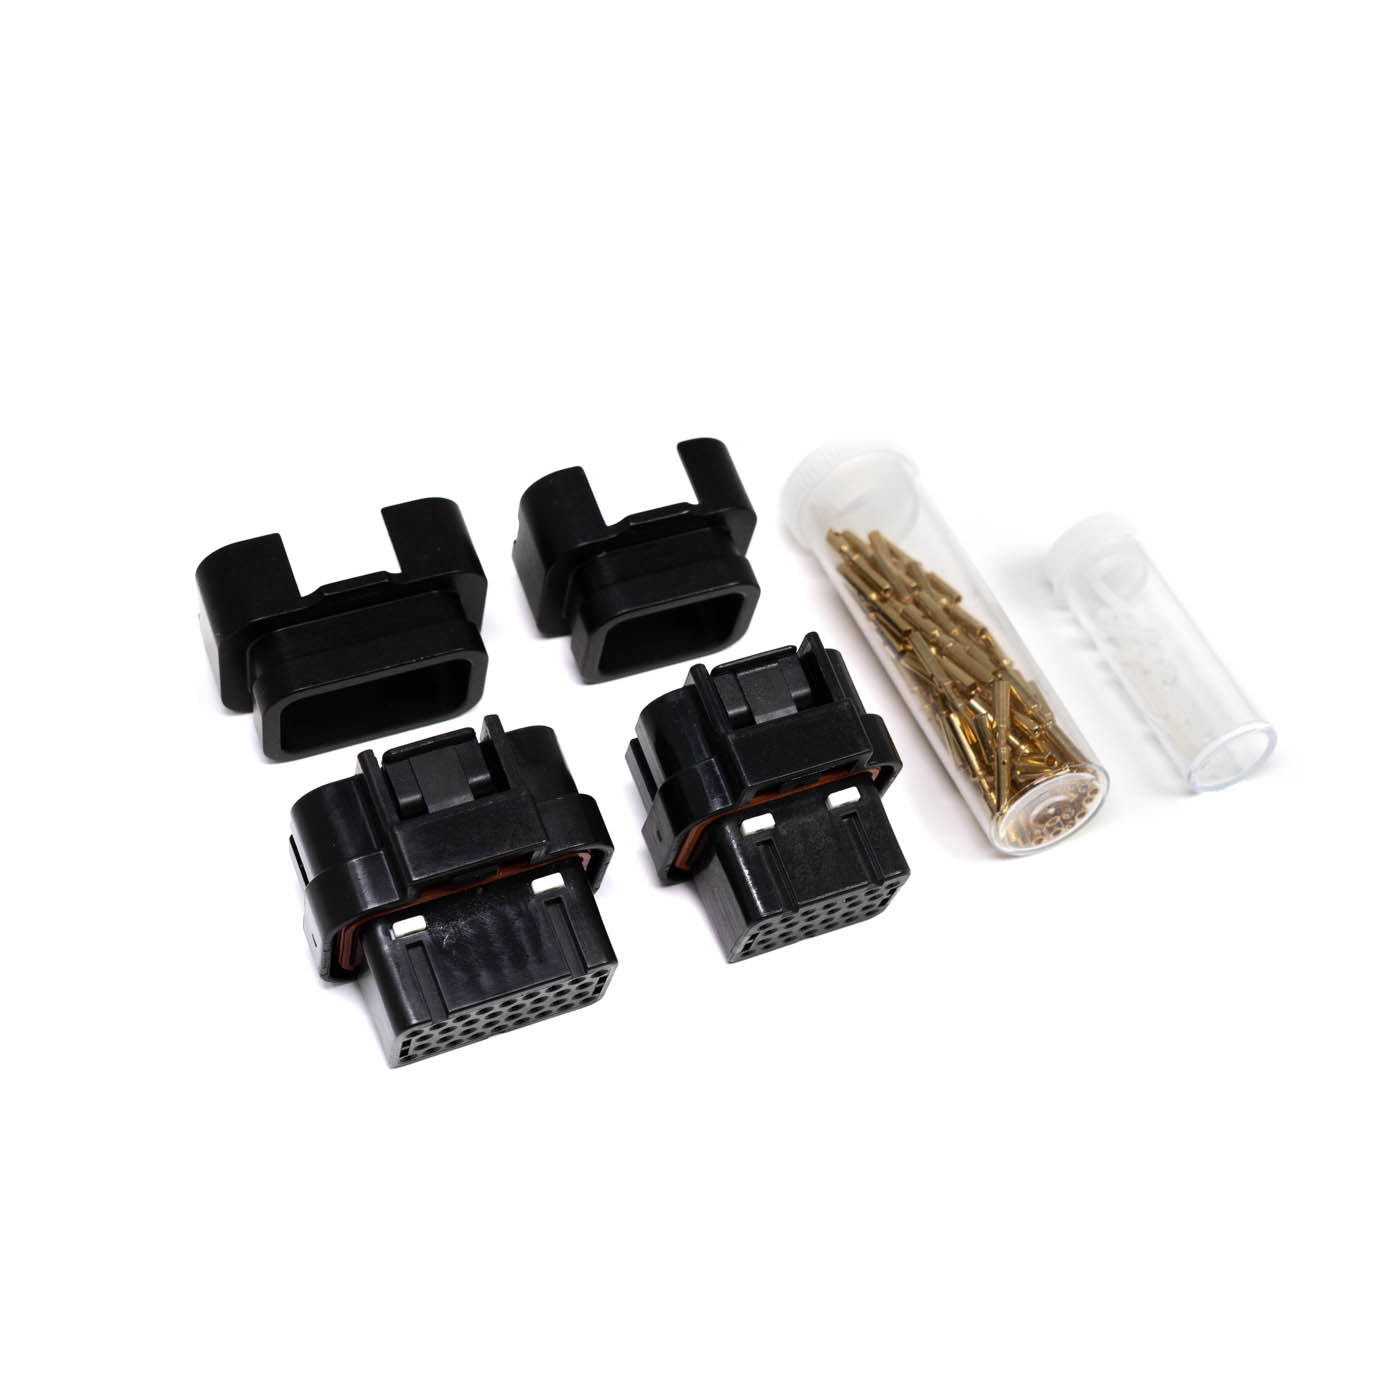 Race Spec® SS 1.0 Mating Connector Kits